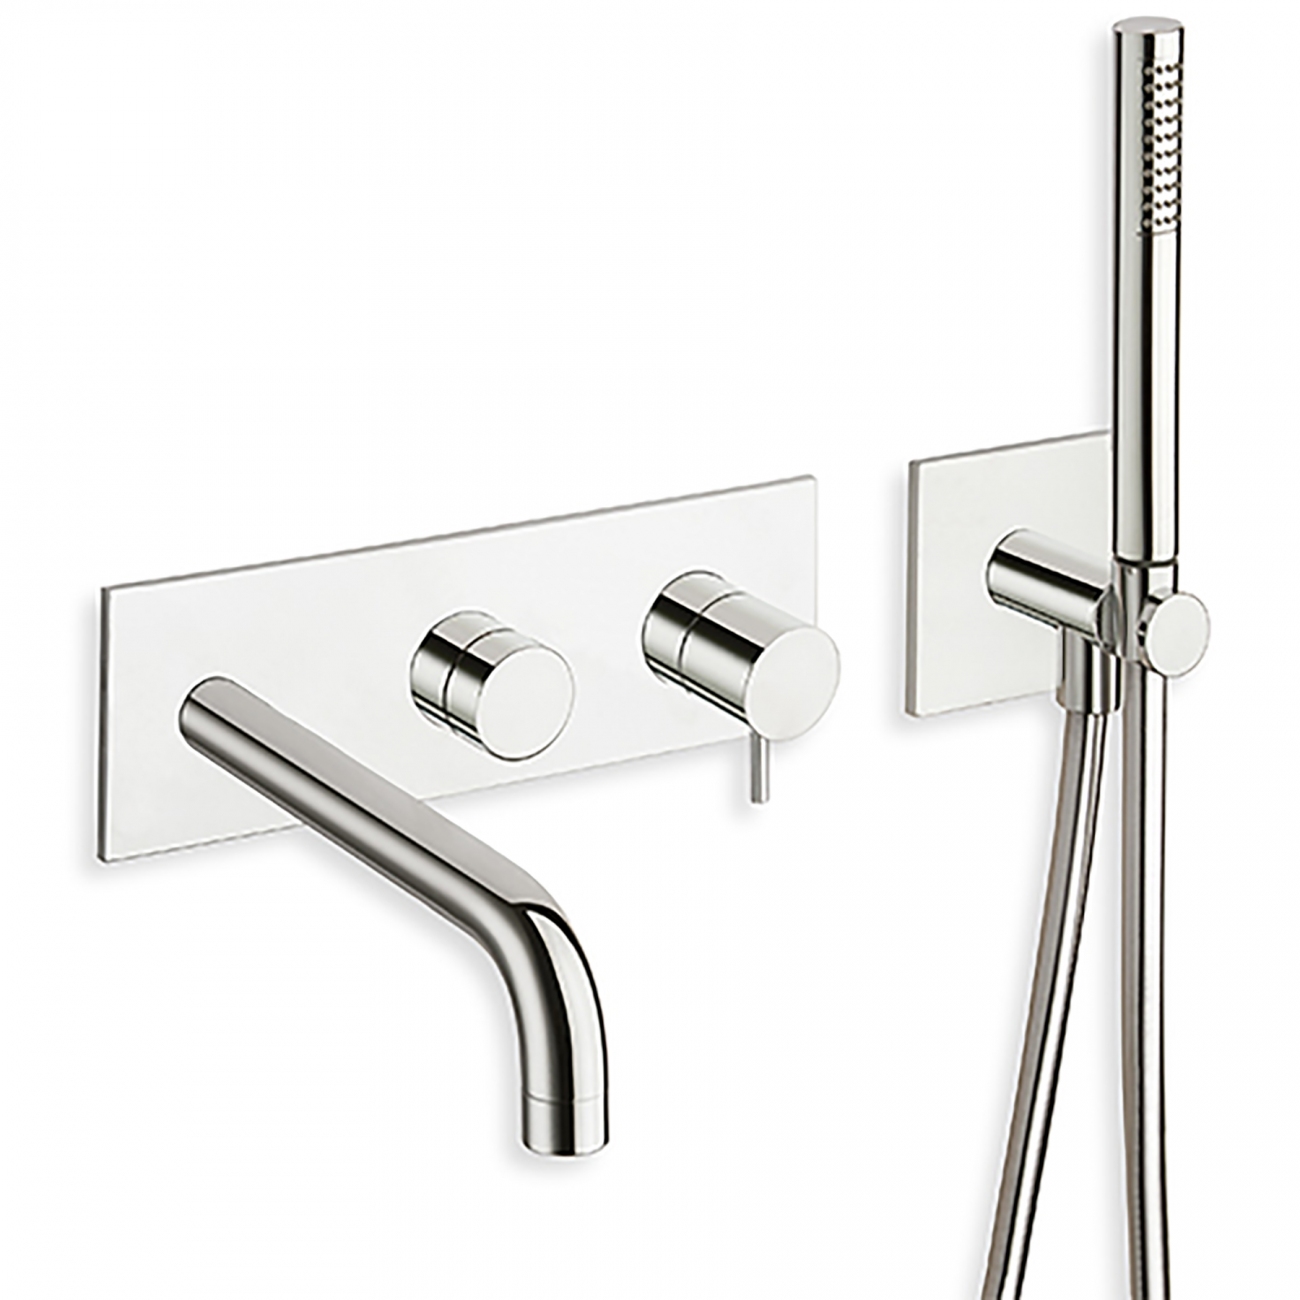 Cristina Contemporary Lines Tricolore Verde Wall Mounted Shower Bath Mixer Group